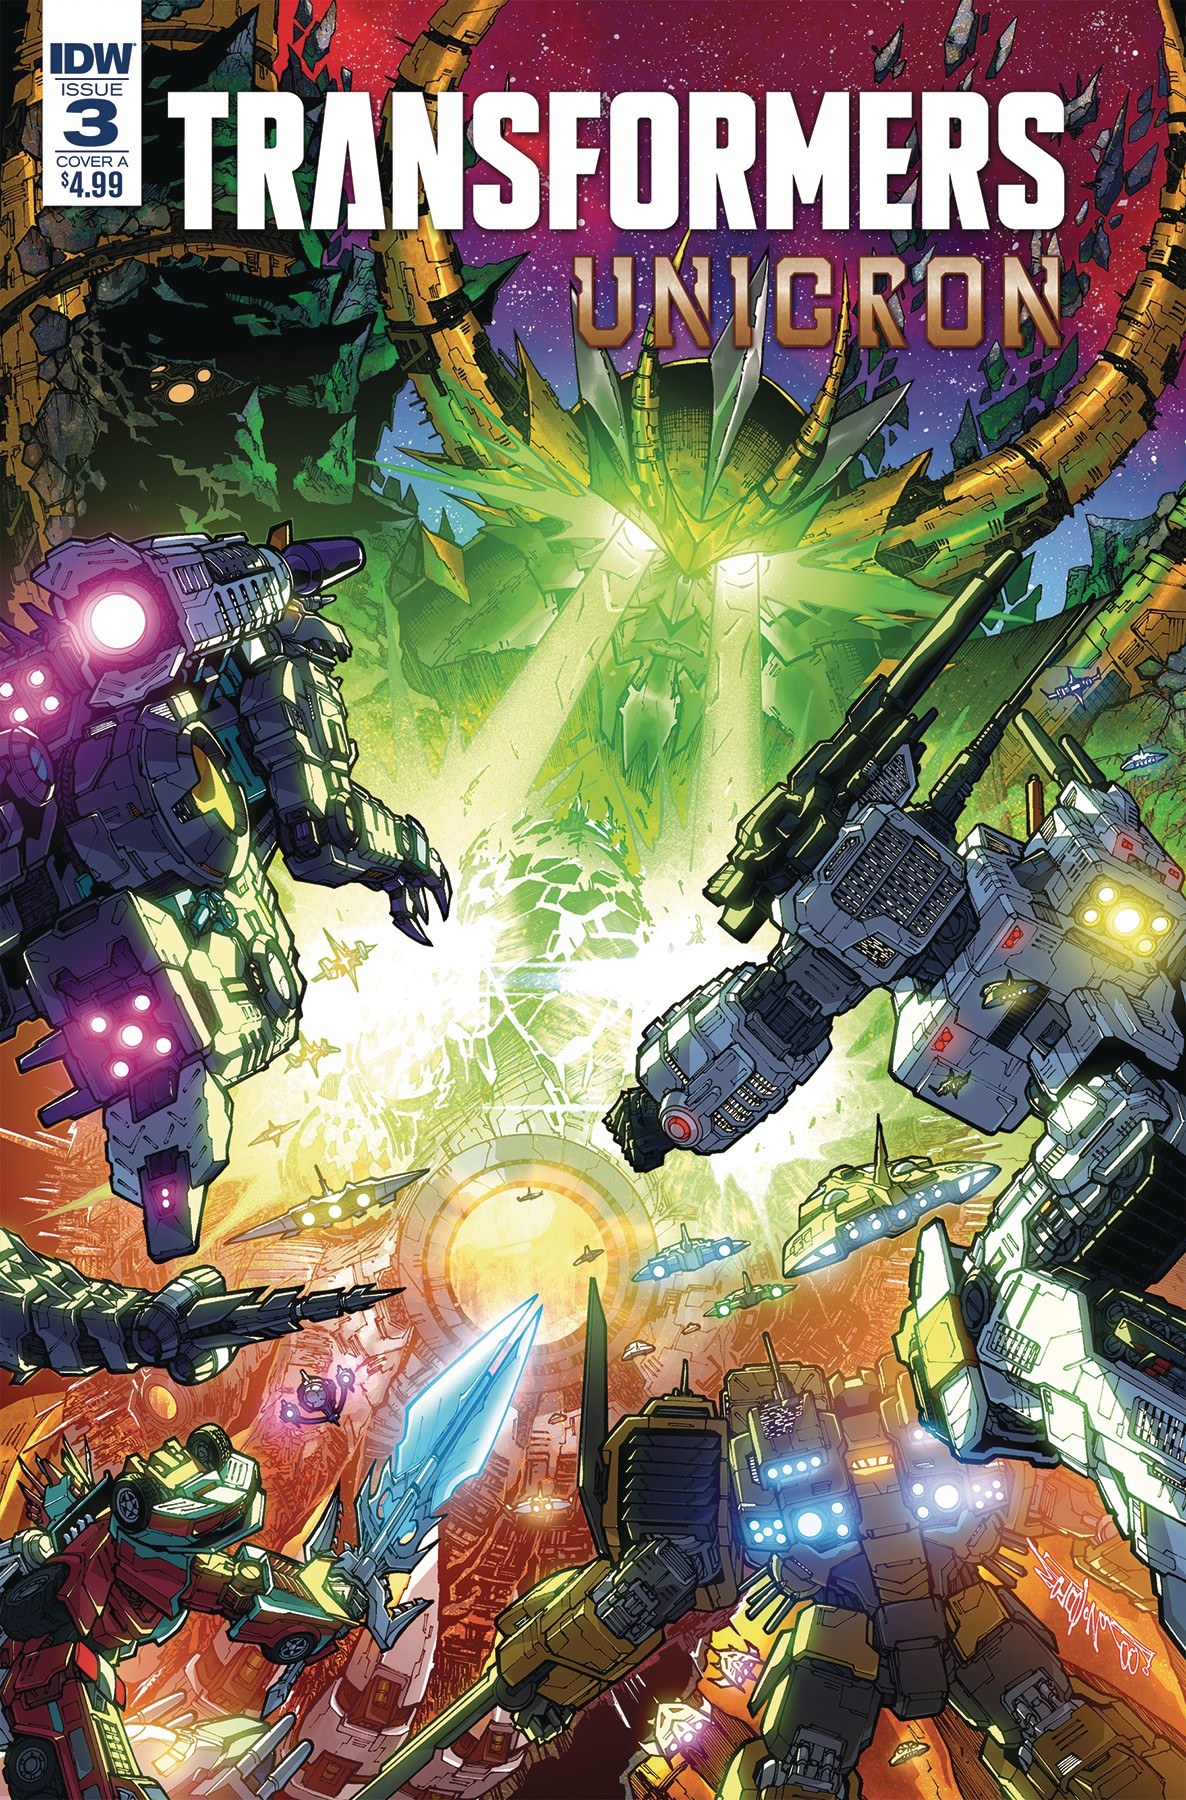 Transformers News: Interview with IDW Transformers Writer John Barber on Unicron